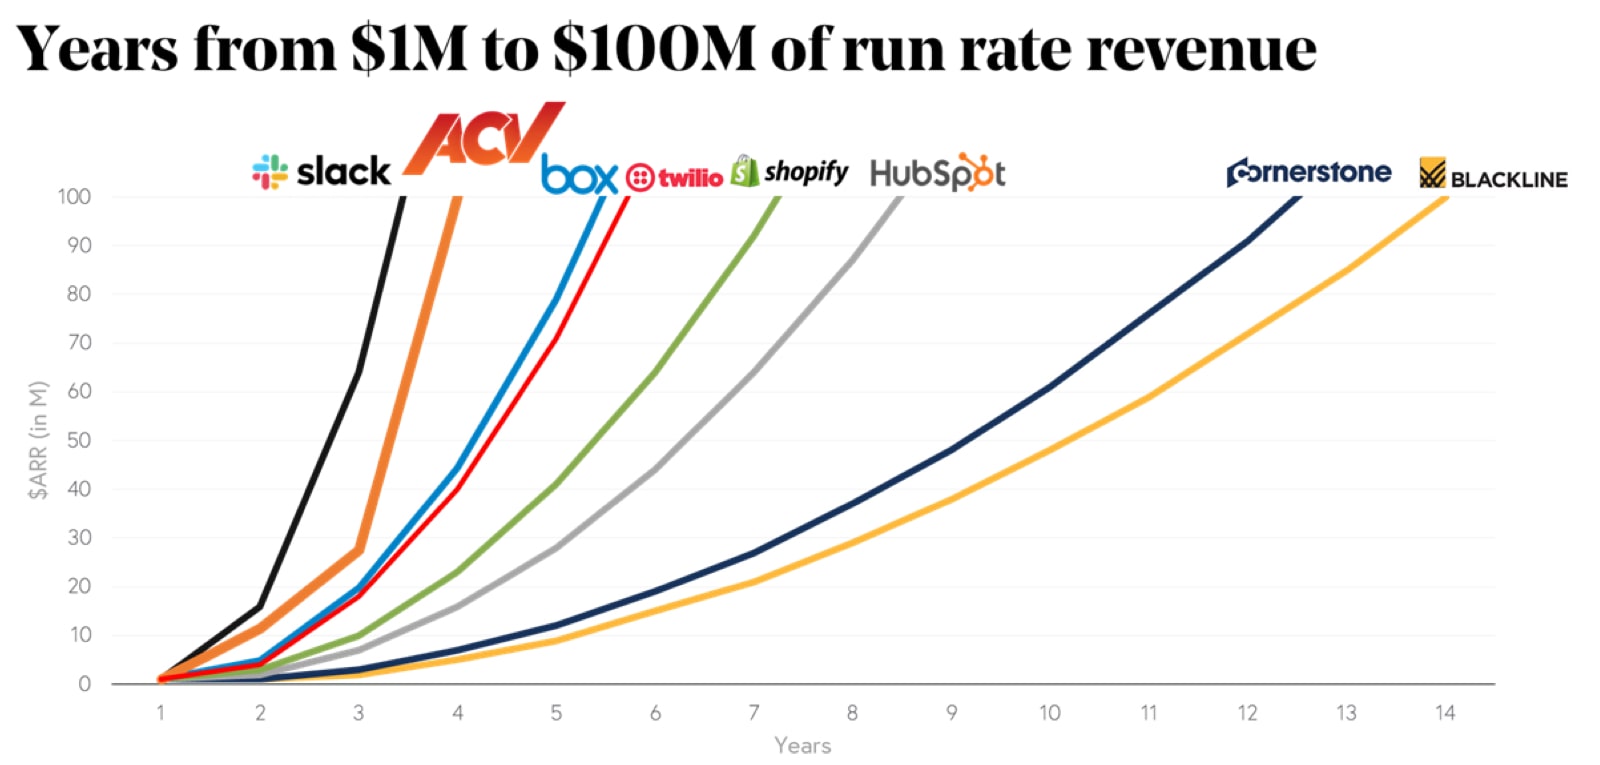 Chart of Years from $1M to $100M of run rate revenue